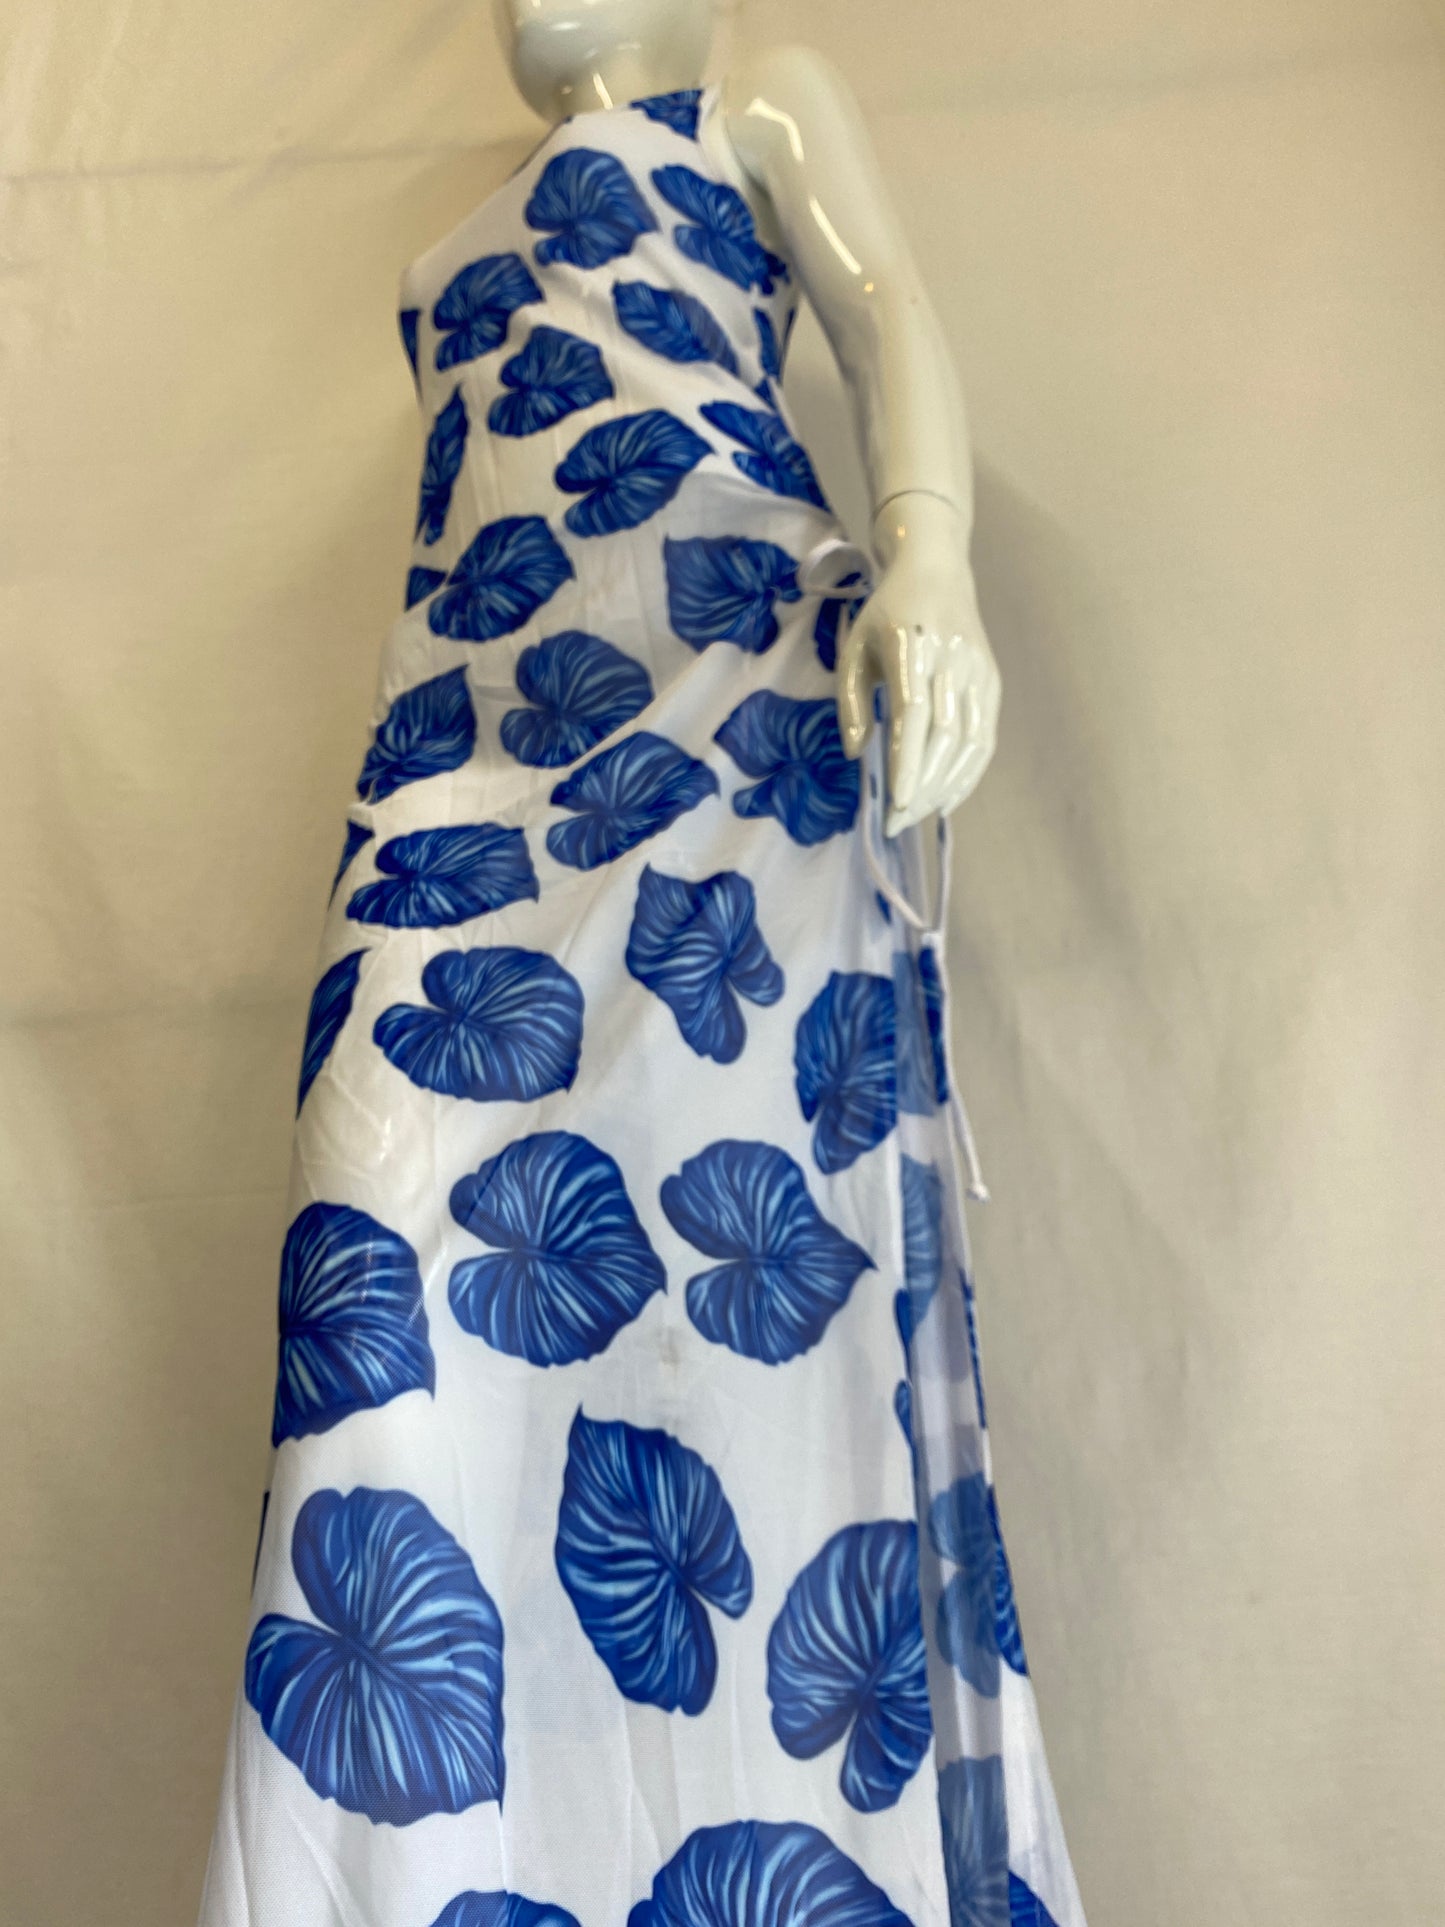 Sheer Blue & White Leafy Beach Cover Up Maxi Dress Size 8